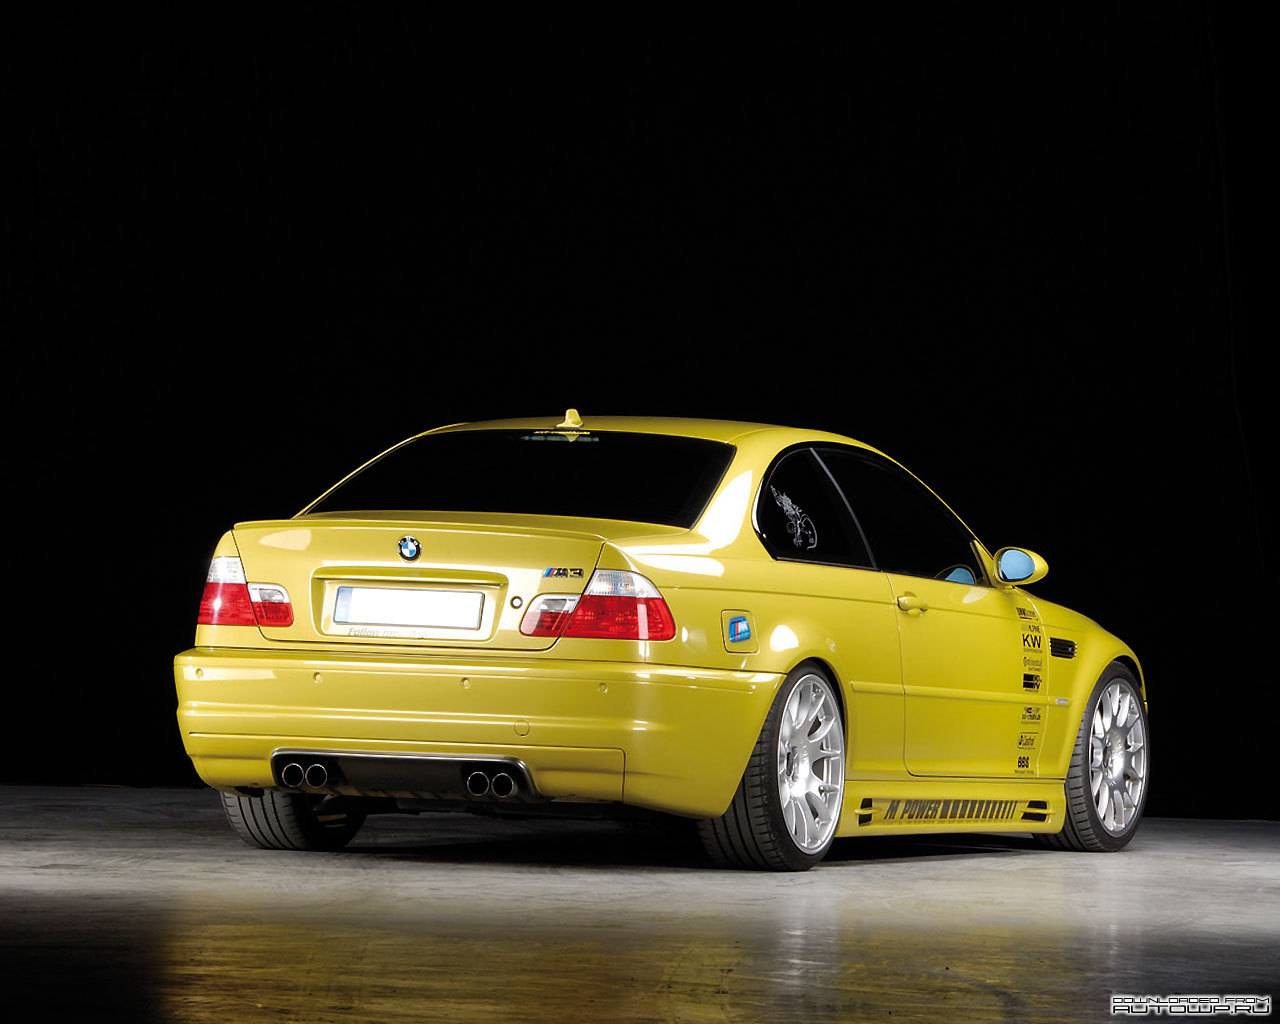 You can vote for this Rieger BMW M3 Coupe (E46) photo